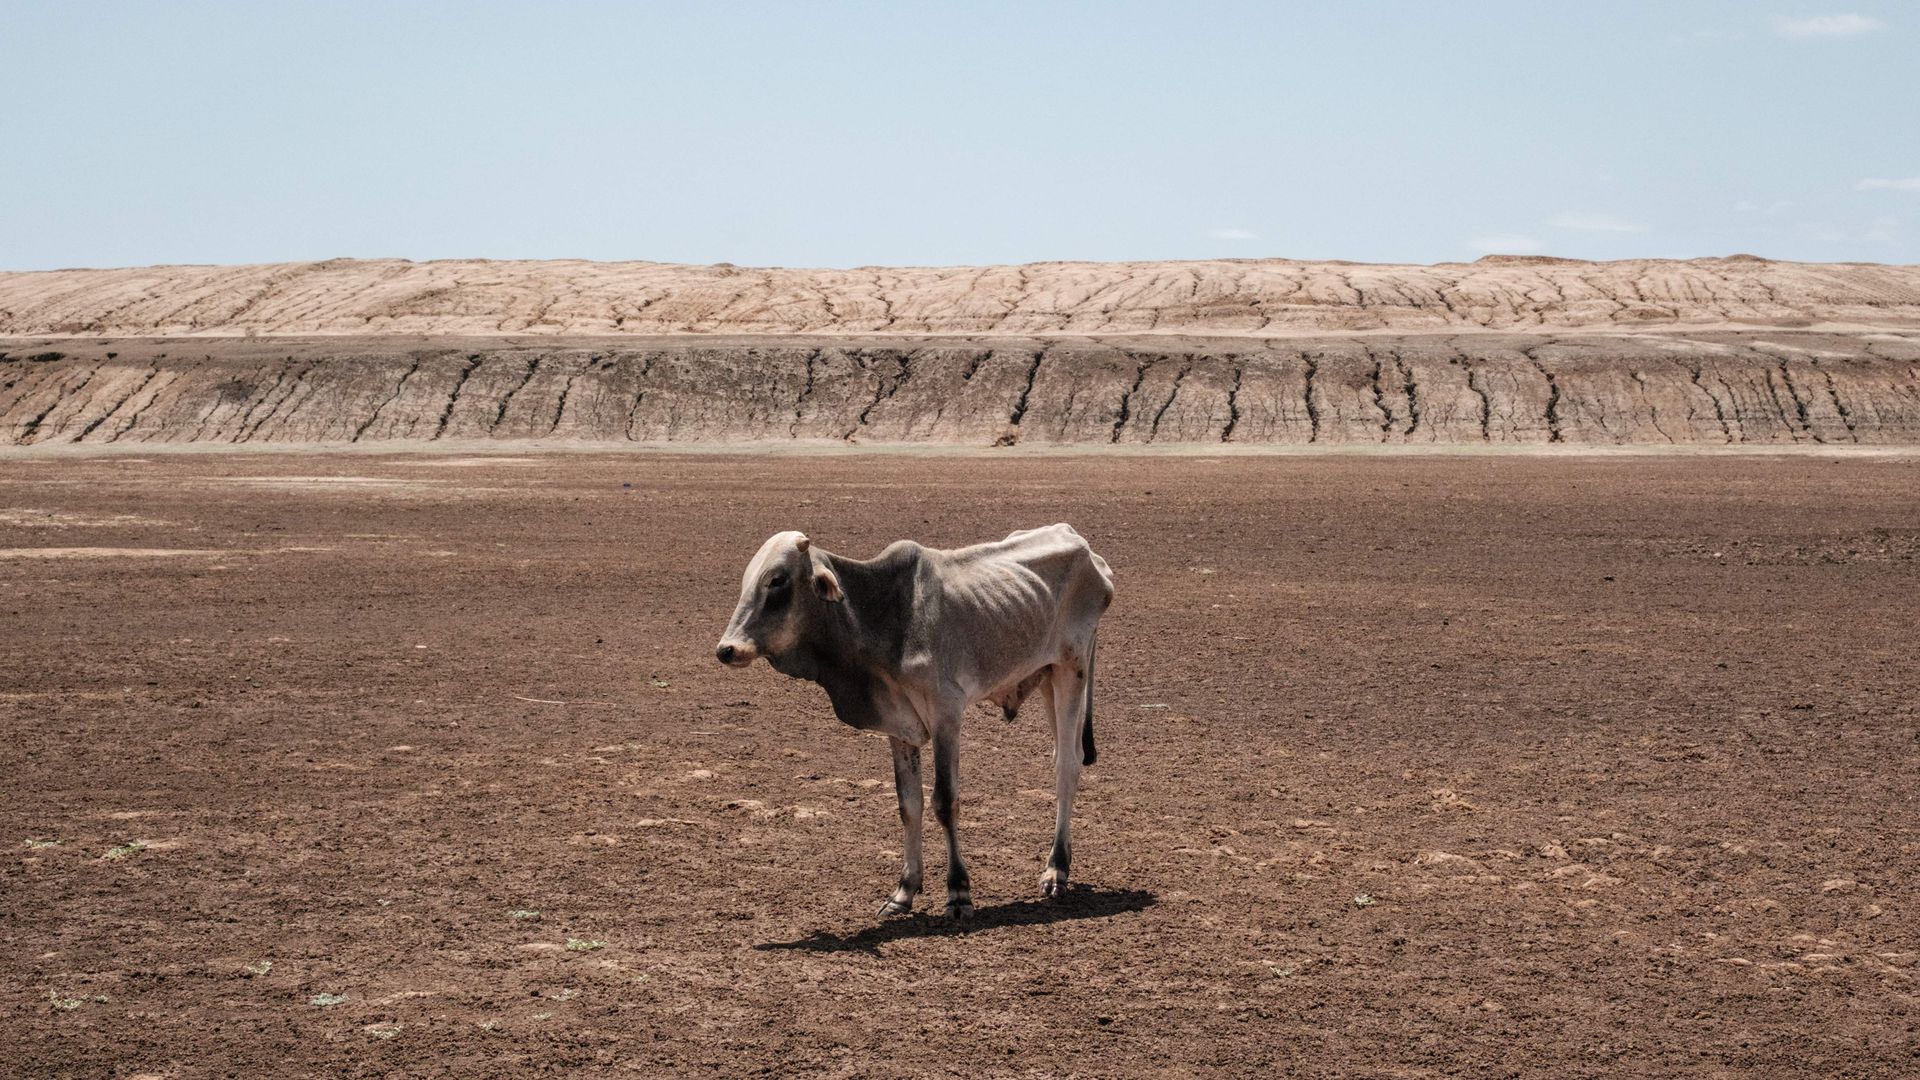 A starving cow stands in a sunny, barren field in Ethiopia, where a severe drought exists.